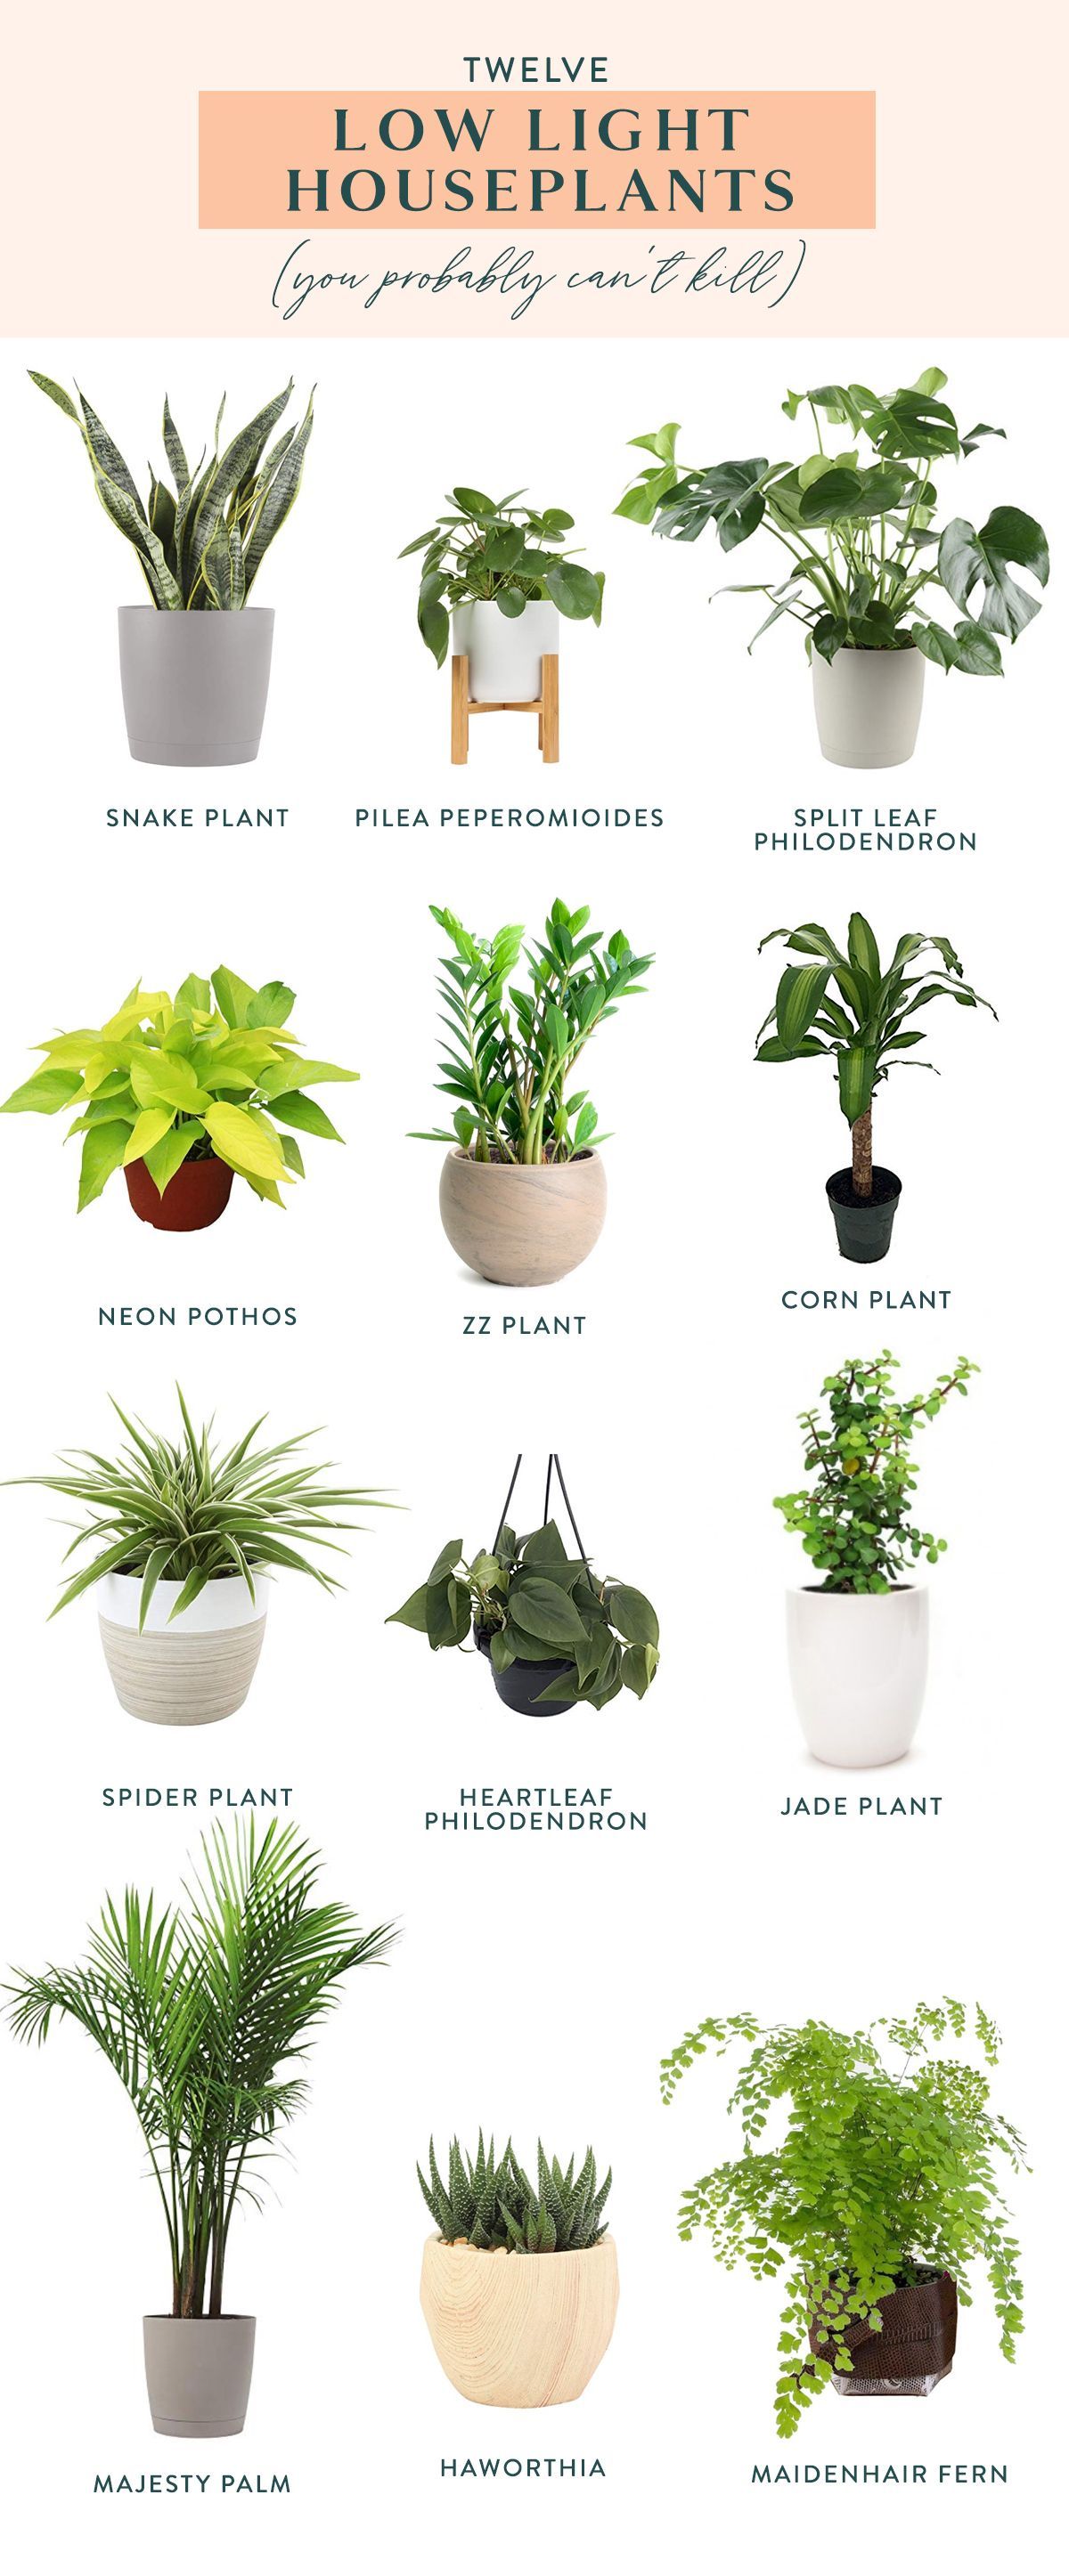 Twelve Low Light Indoor Plants You Probably Can't Kill -   19 plants Decoration how to grow ideas